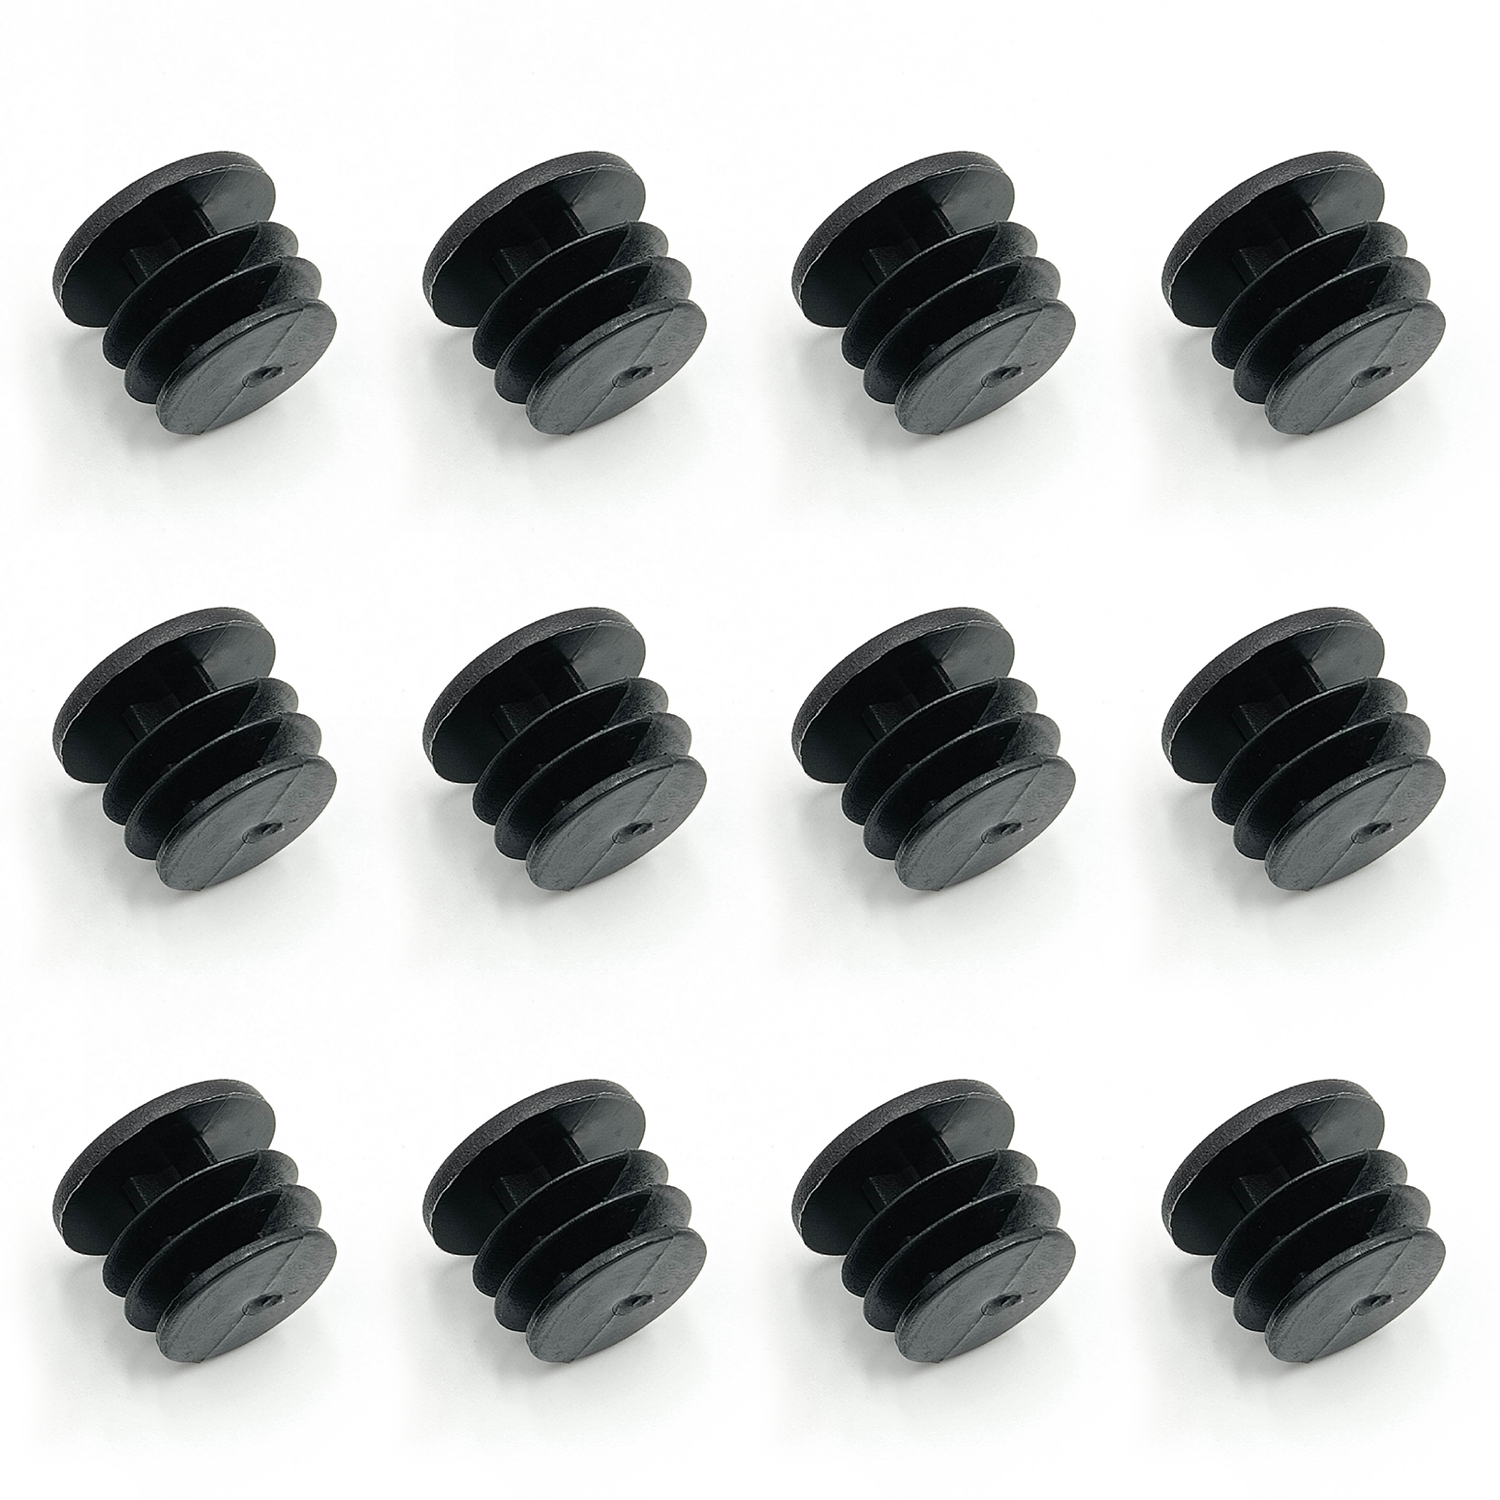 ONIPAX Plastic Handle Bar End Plugs 12pcs Caps for MTB Road Bicycle